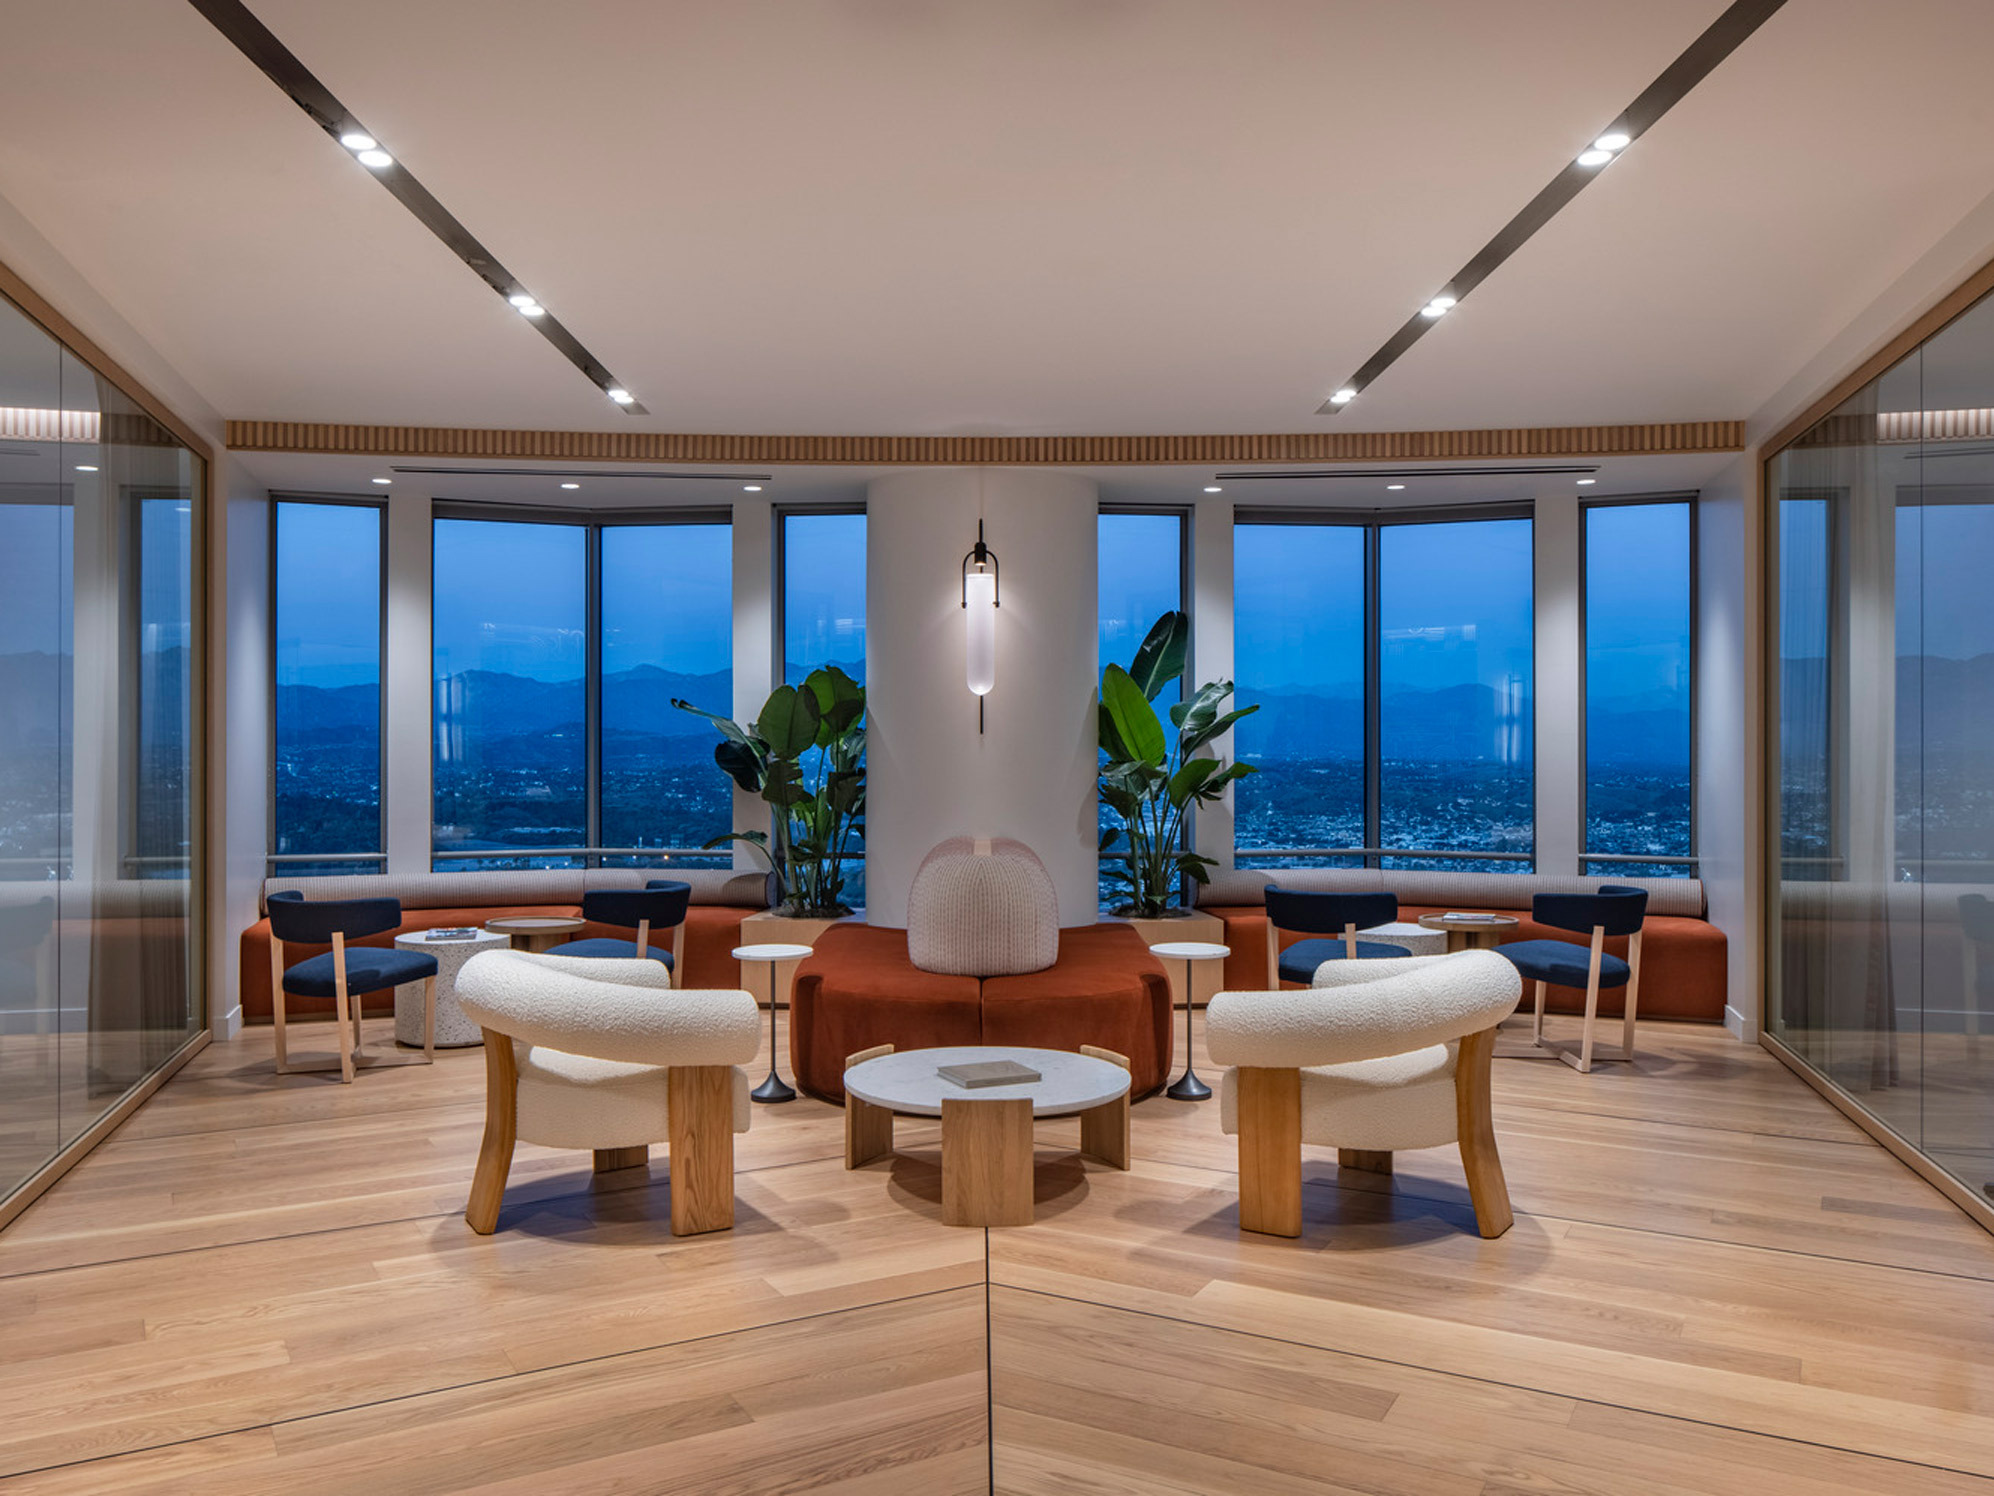 Modern interior showcasing a symmetrical layout with natural wood floors, recessed lighting, and floor-to-ceiling windows overlooking a cityscape. Central conversation area features contemporary furniture with organic lines, accented by potted plants and a statement pendant light.